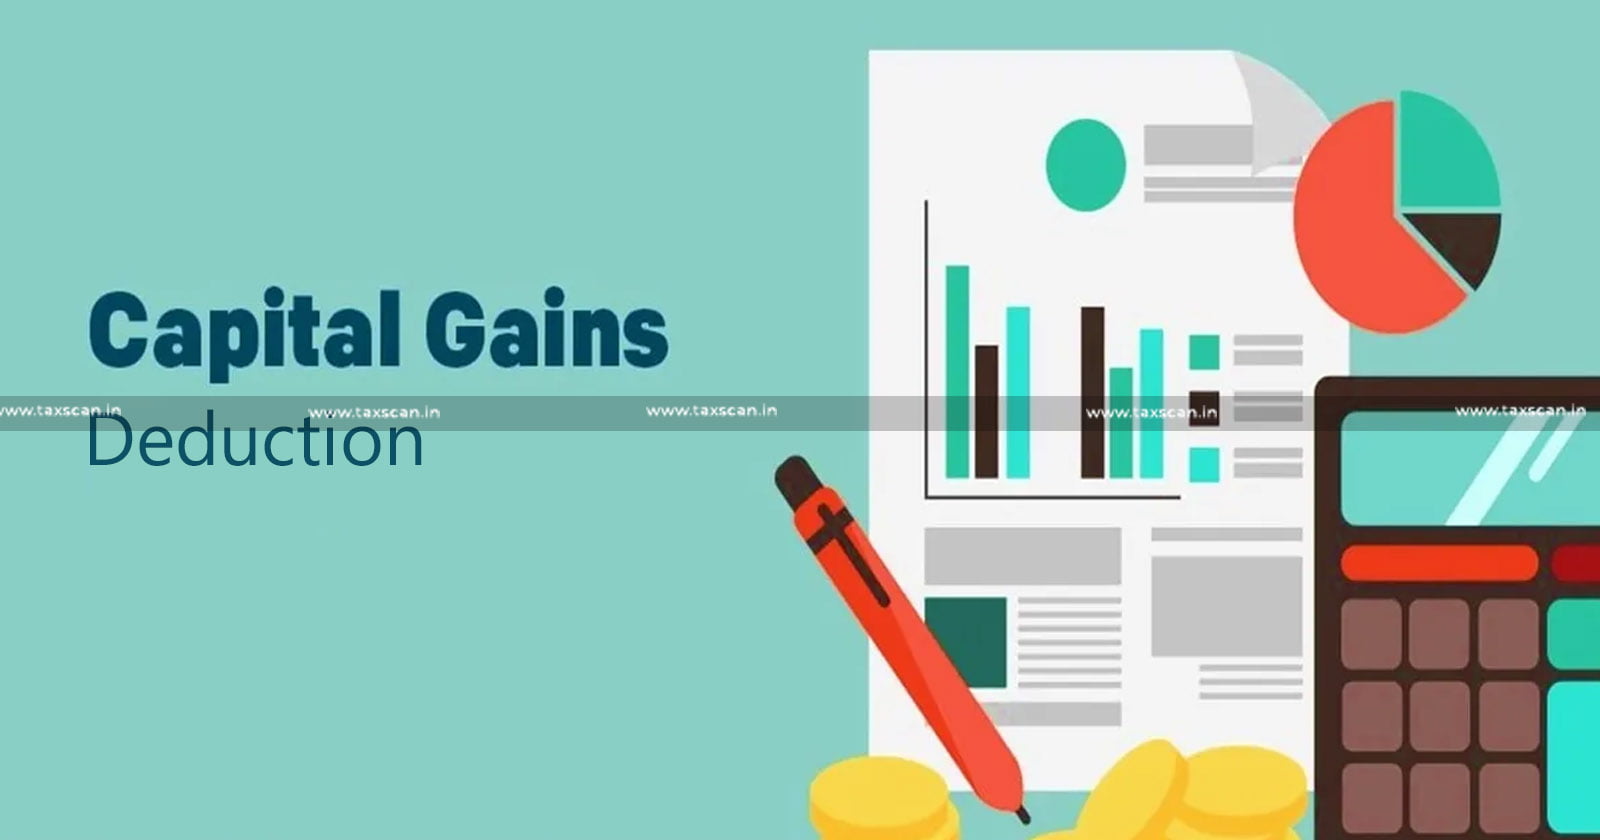 Capital Gain - Capital Gain Deduction - Capital gains for couples - Property Owners - Spouse tax - taxscan